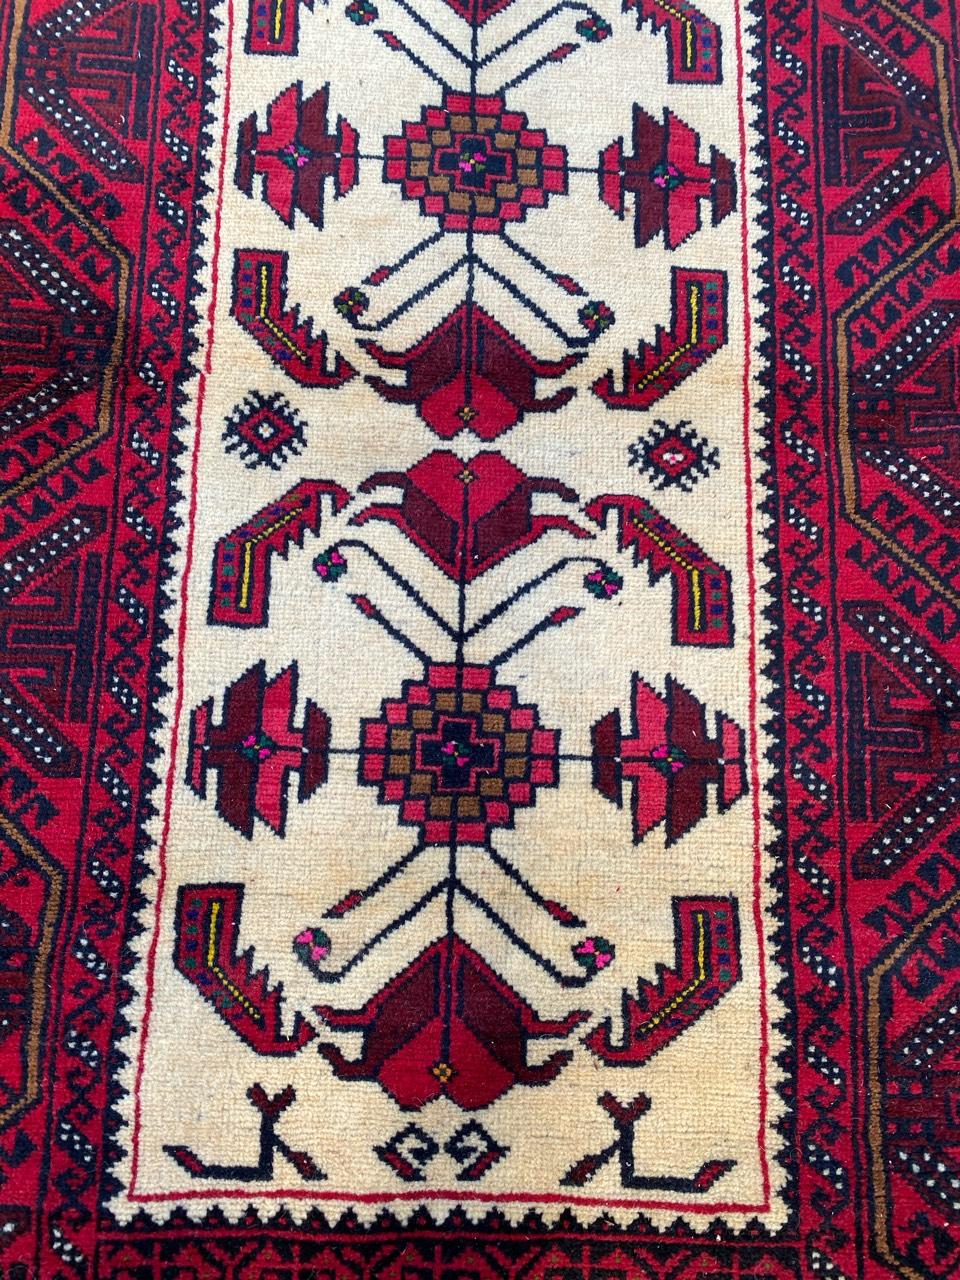 Exquisite 20th-century Afghan rug featuring a captivating geometrical design and stunning colors, including beige, red, green, purple, and black. Meticulously hand-knotted with wool velvet on a cotton foundation. A timeless piece of art for your